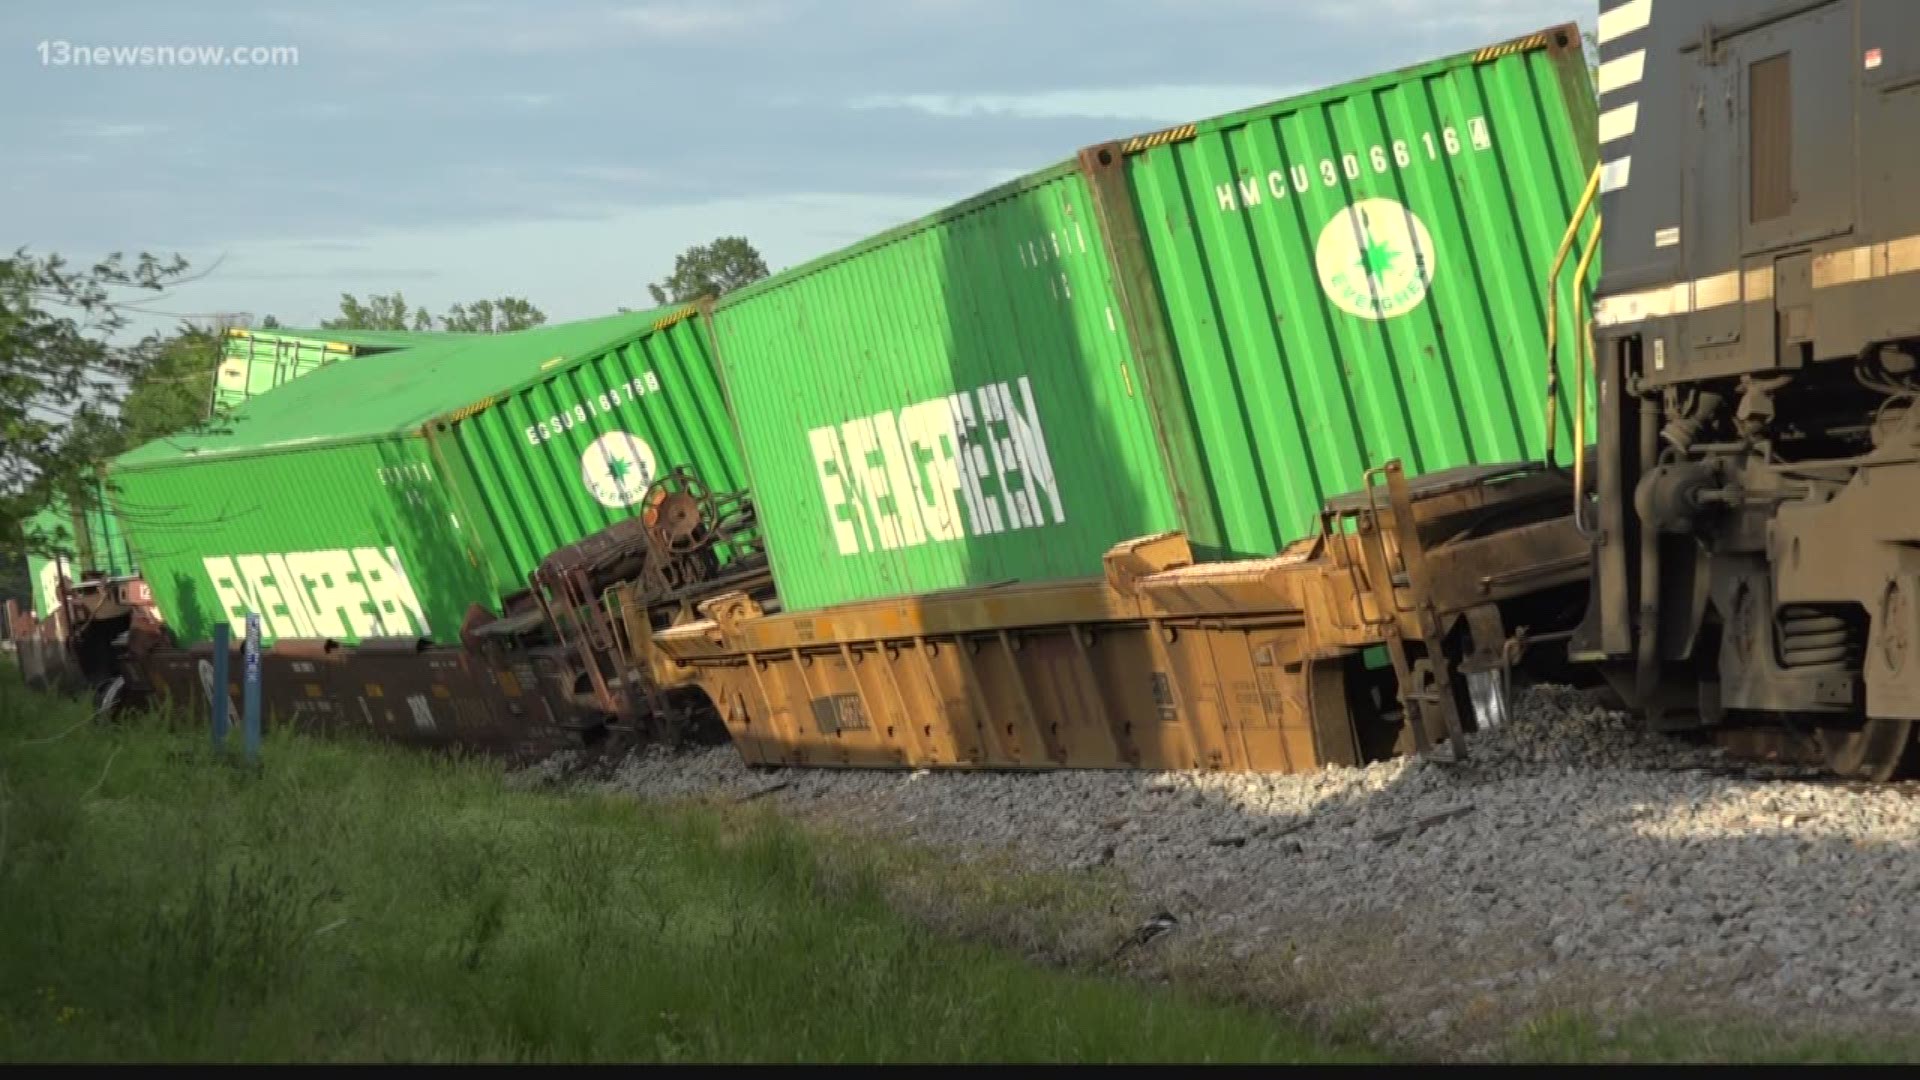 A number or train cars and an engine derailed in Suffolk.